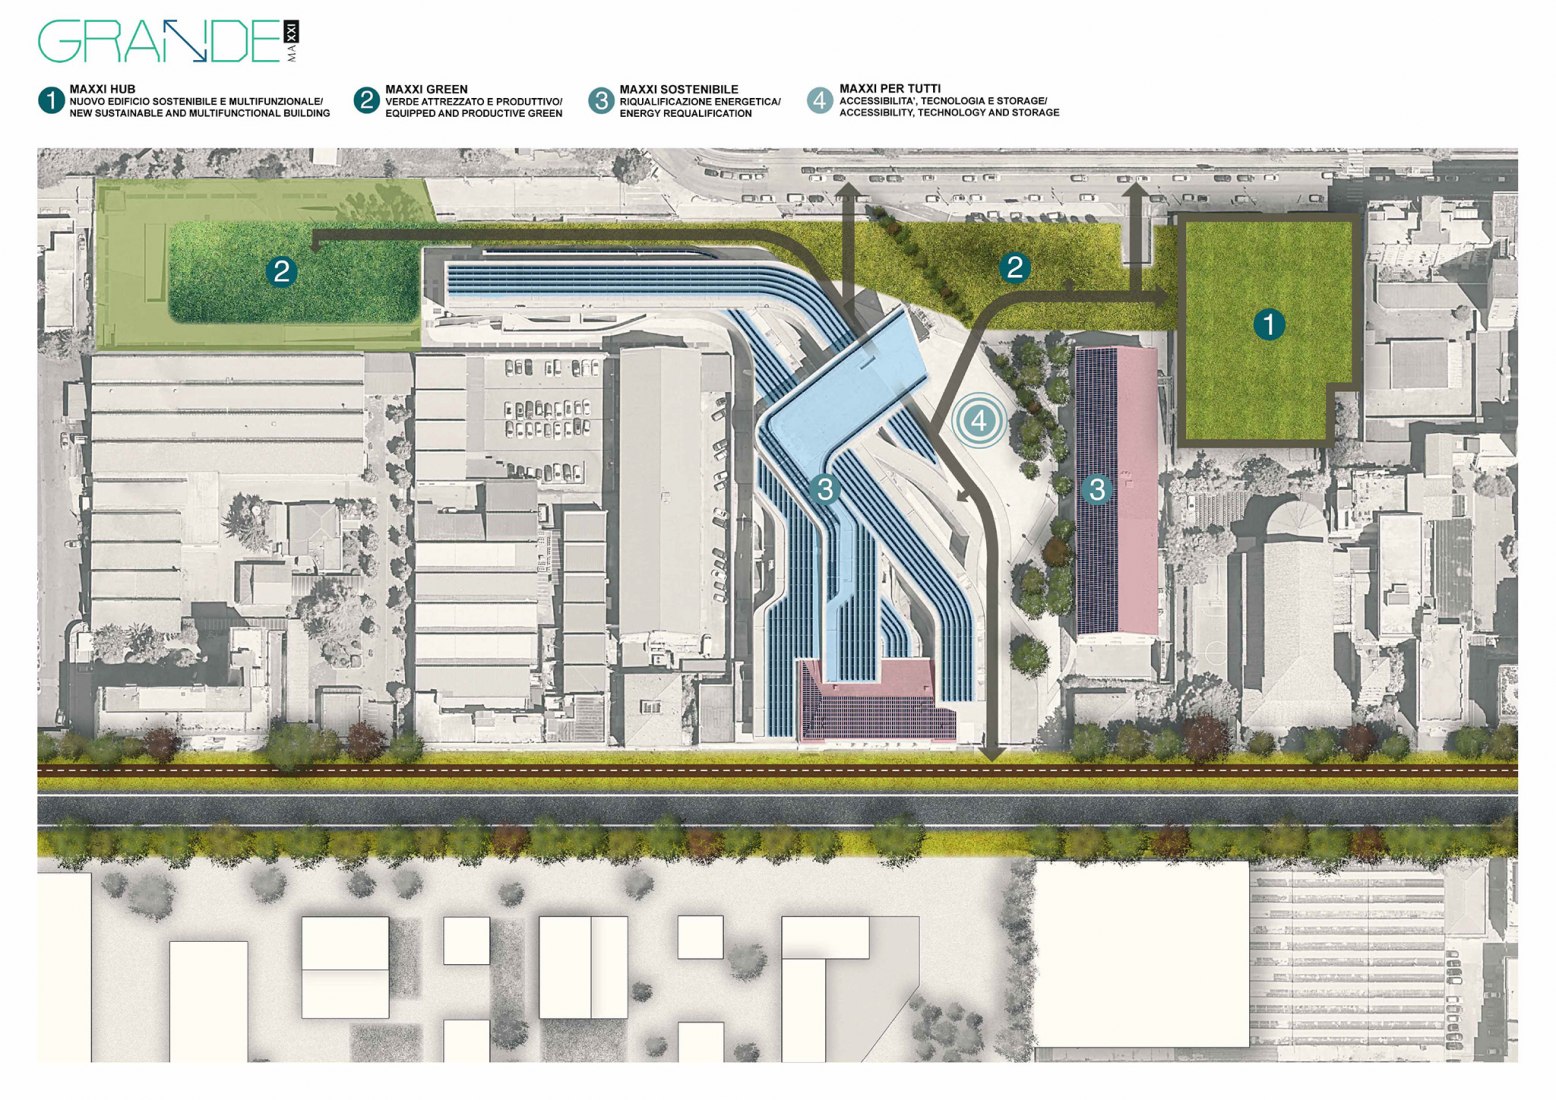 Site plan of the proposed expansion. Image courtesy MAXXI Museum